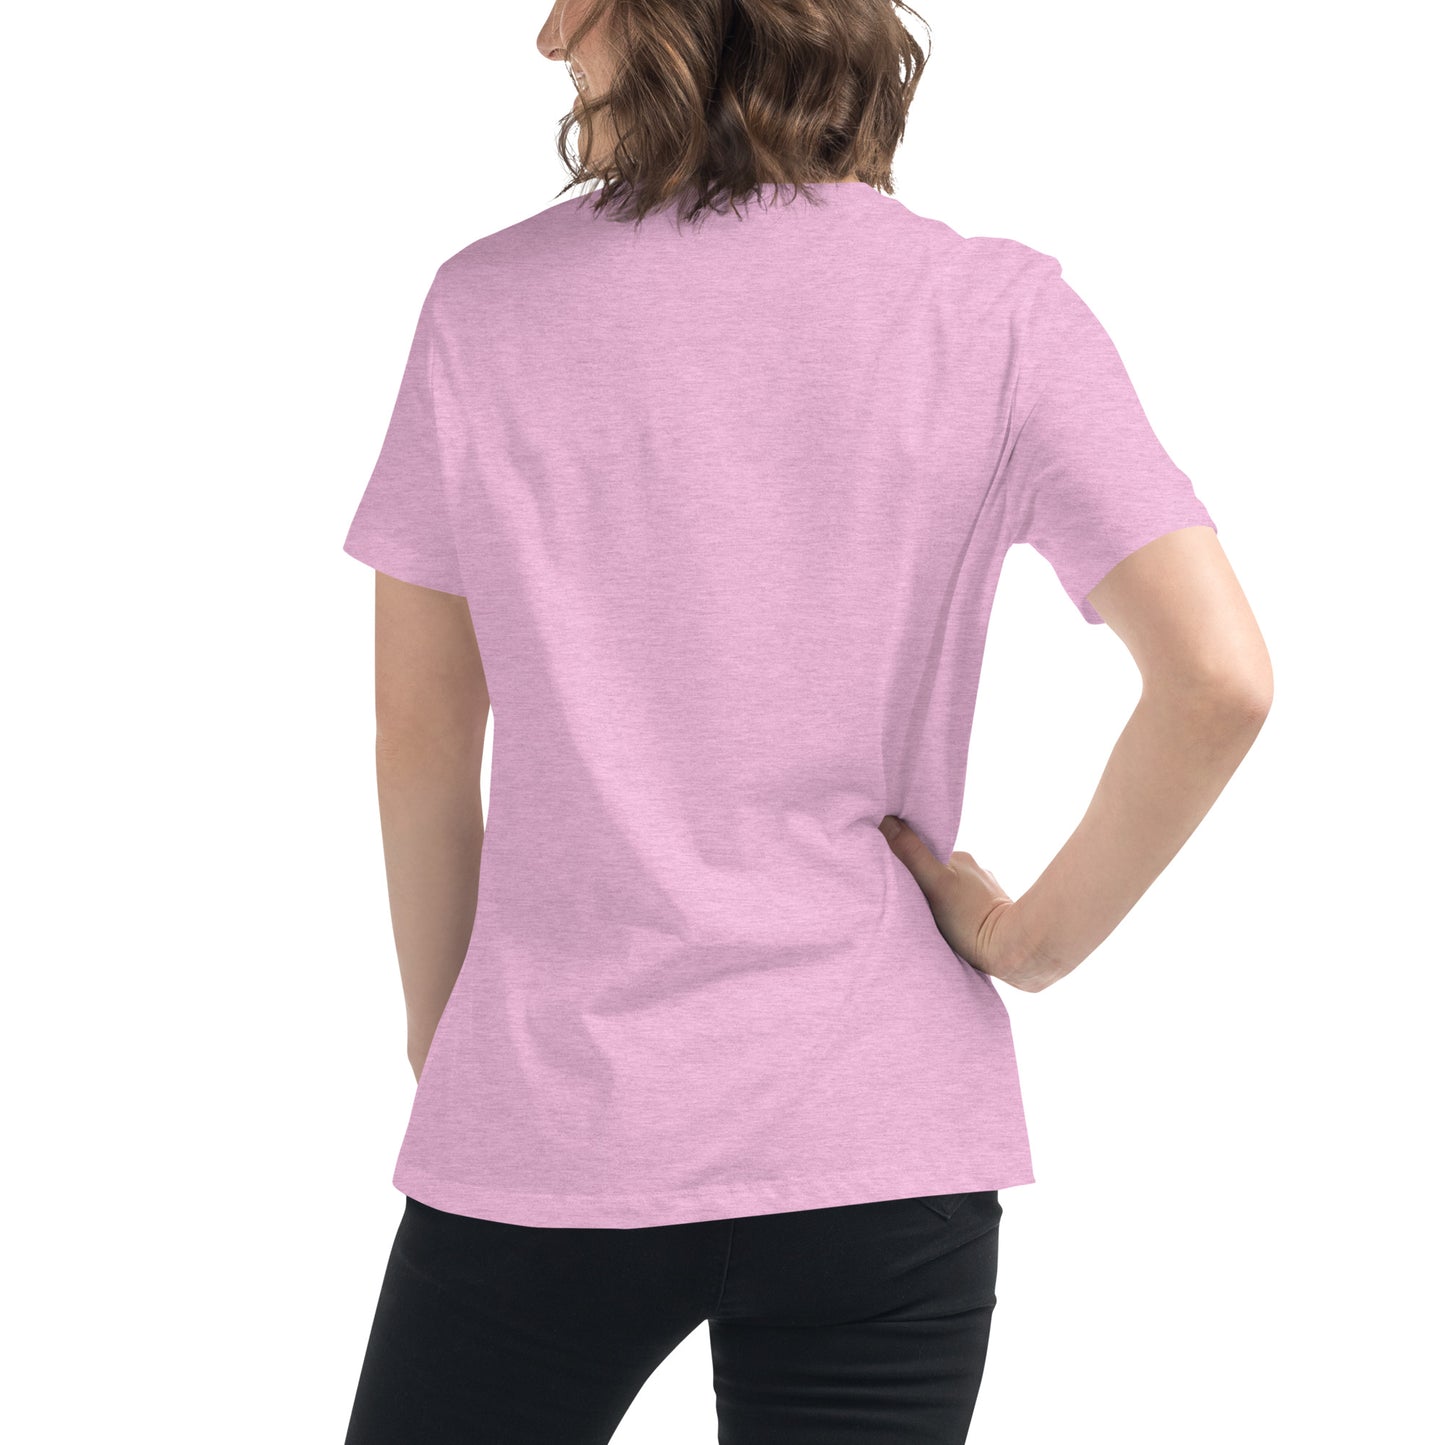 Let me spook to the manager - Women's Relaxed T-Shirt